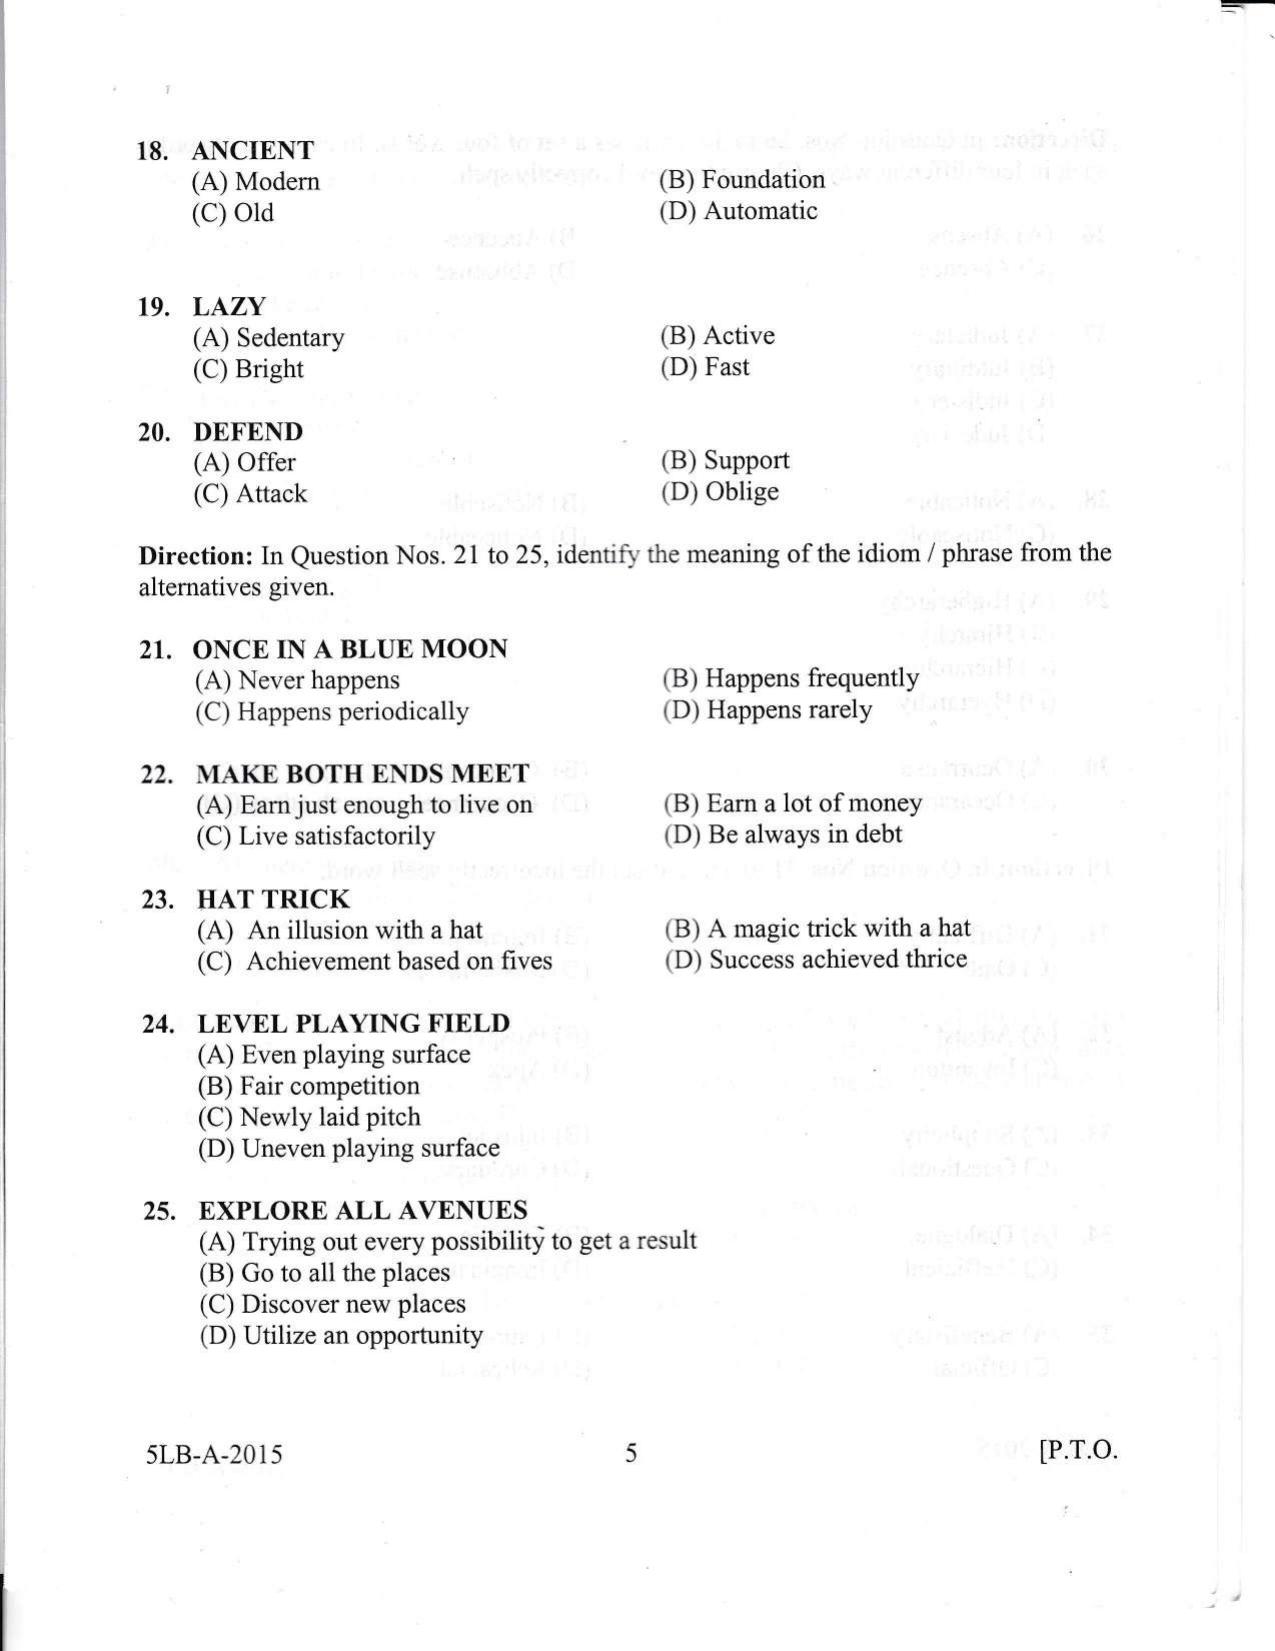 KLEE 5 Year LLB Exam 2015 Question Paper - Page 5